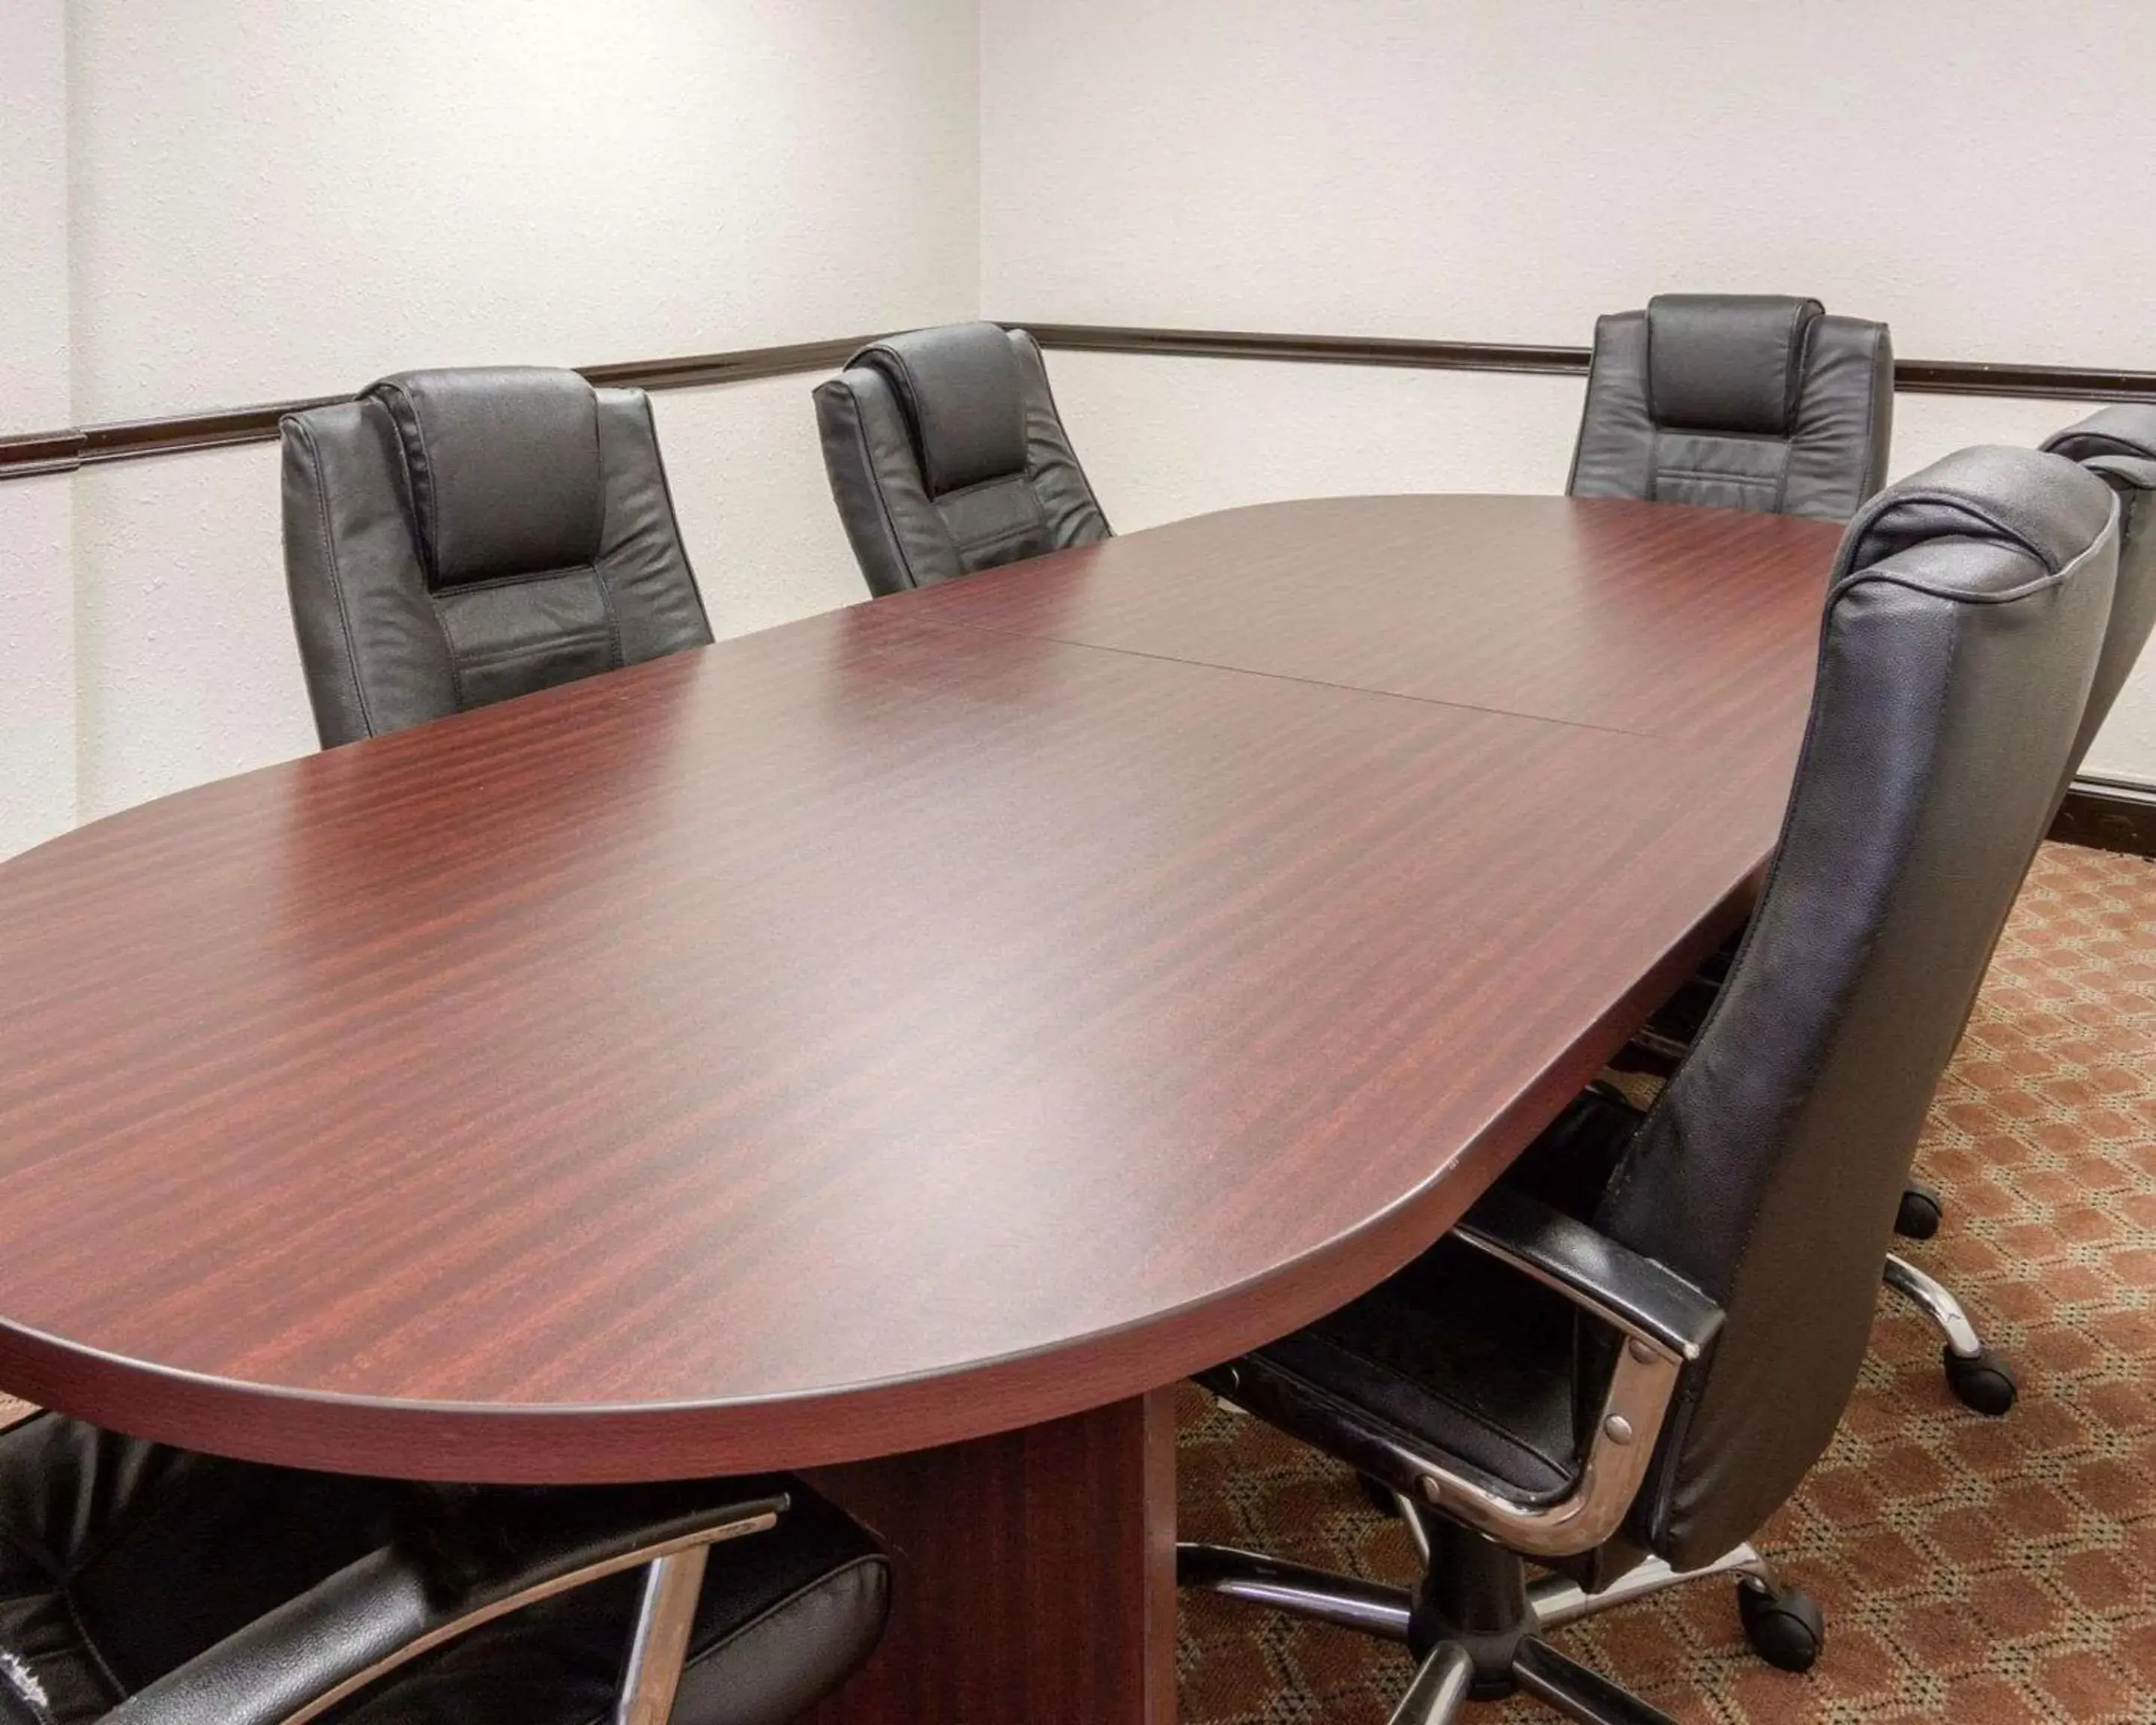 On site, Business Area/Conference Room in Quality Inn Shreveport